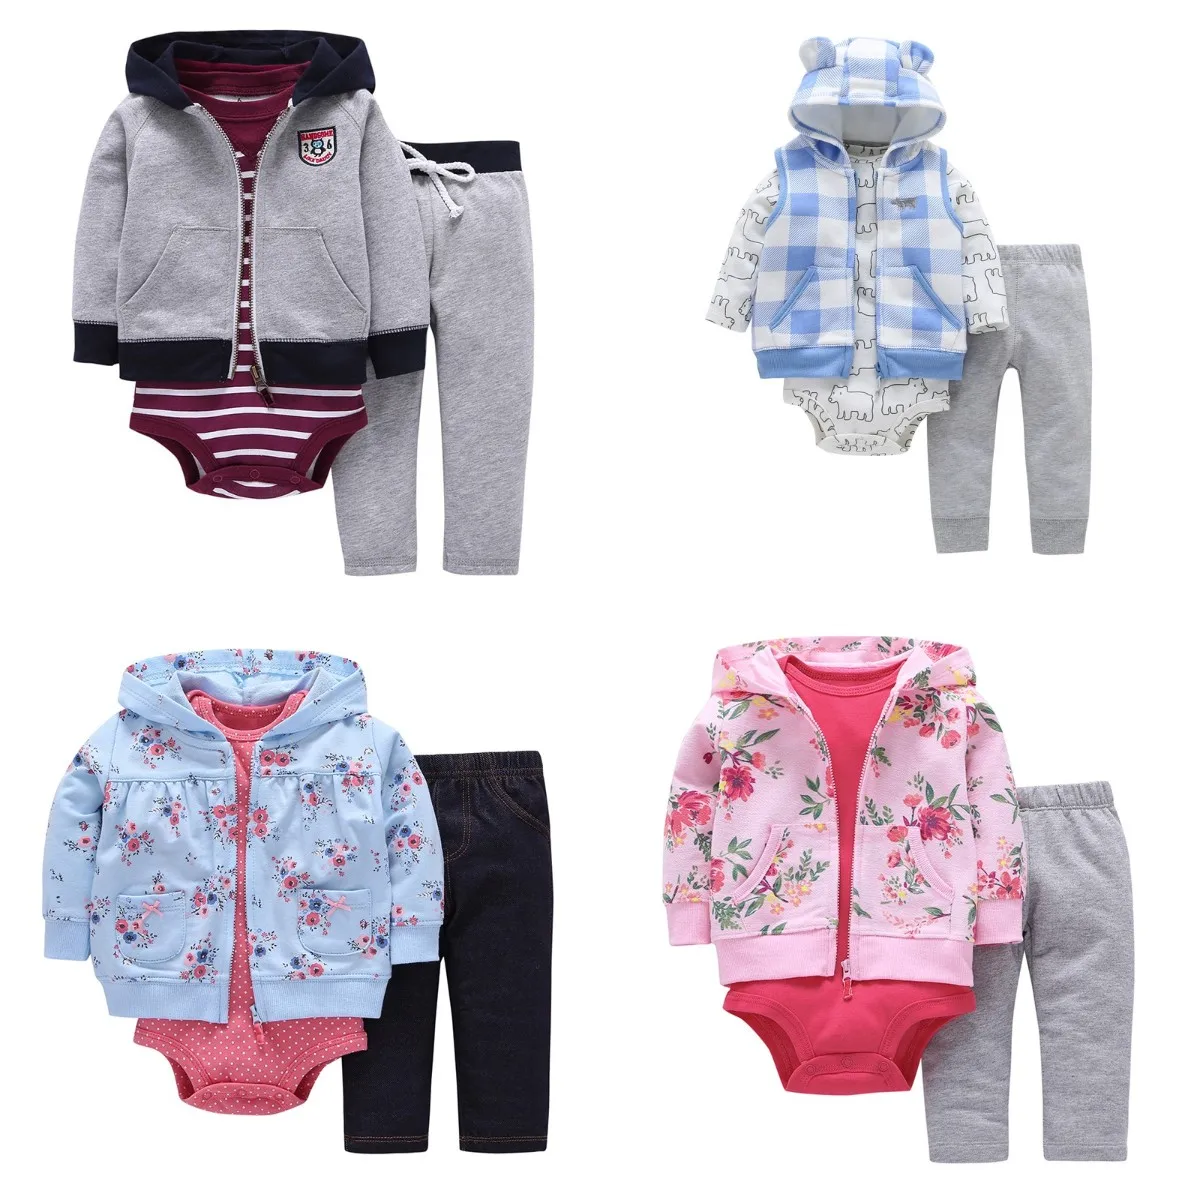 
Trend unisex infant clothing baby suits wear romper set 2021 wholesale baby clothes in bulk  (1600177434618)